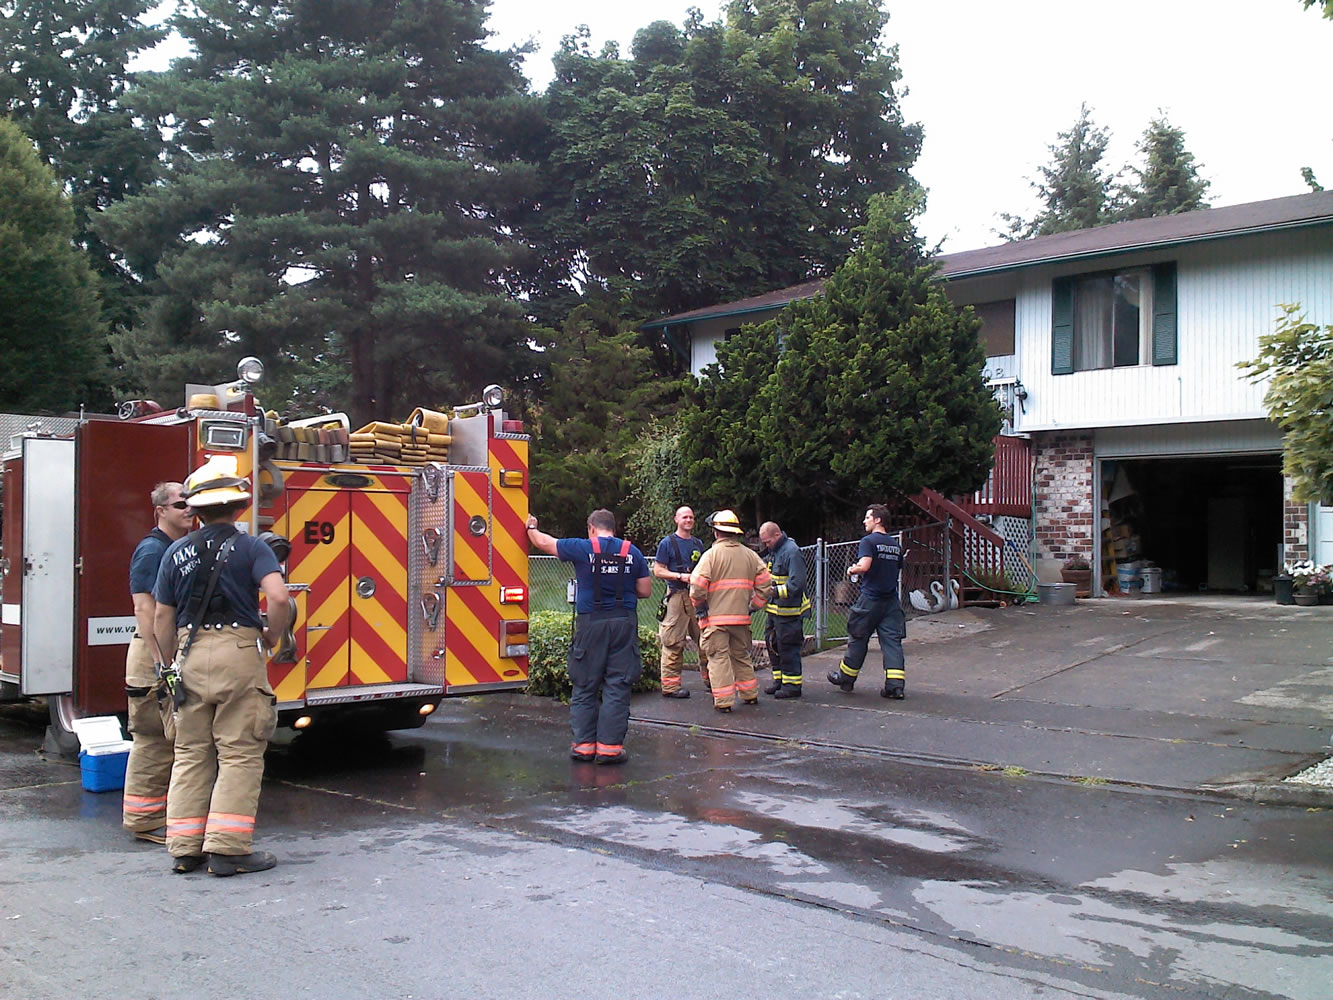 Vancouver firefighters take a break after extinguishing a kitchen fire this afternoon.